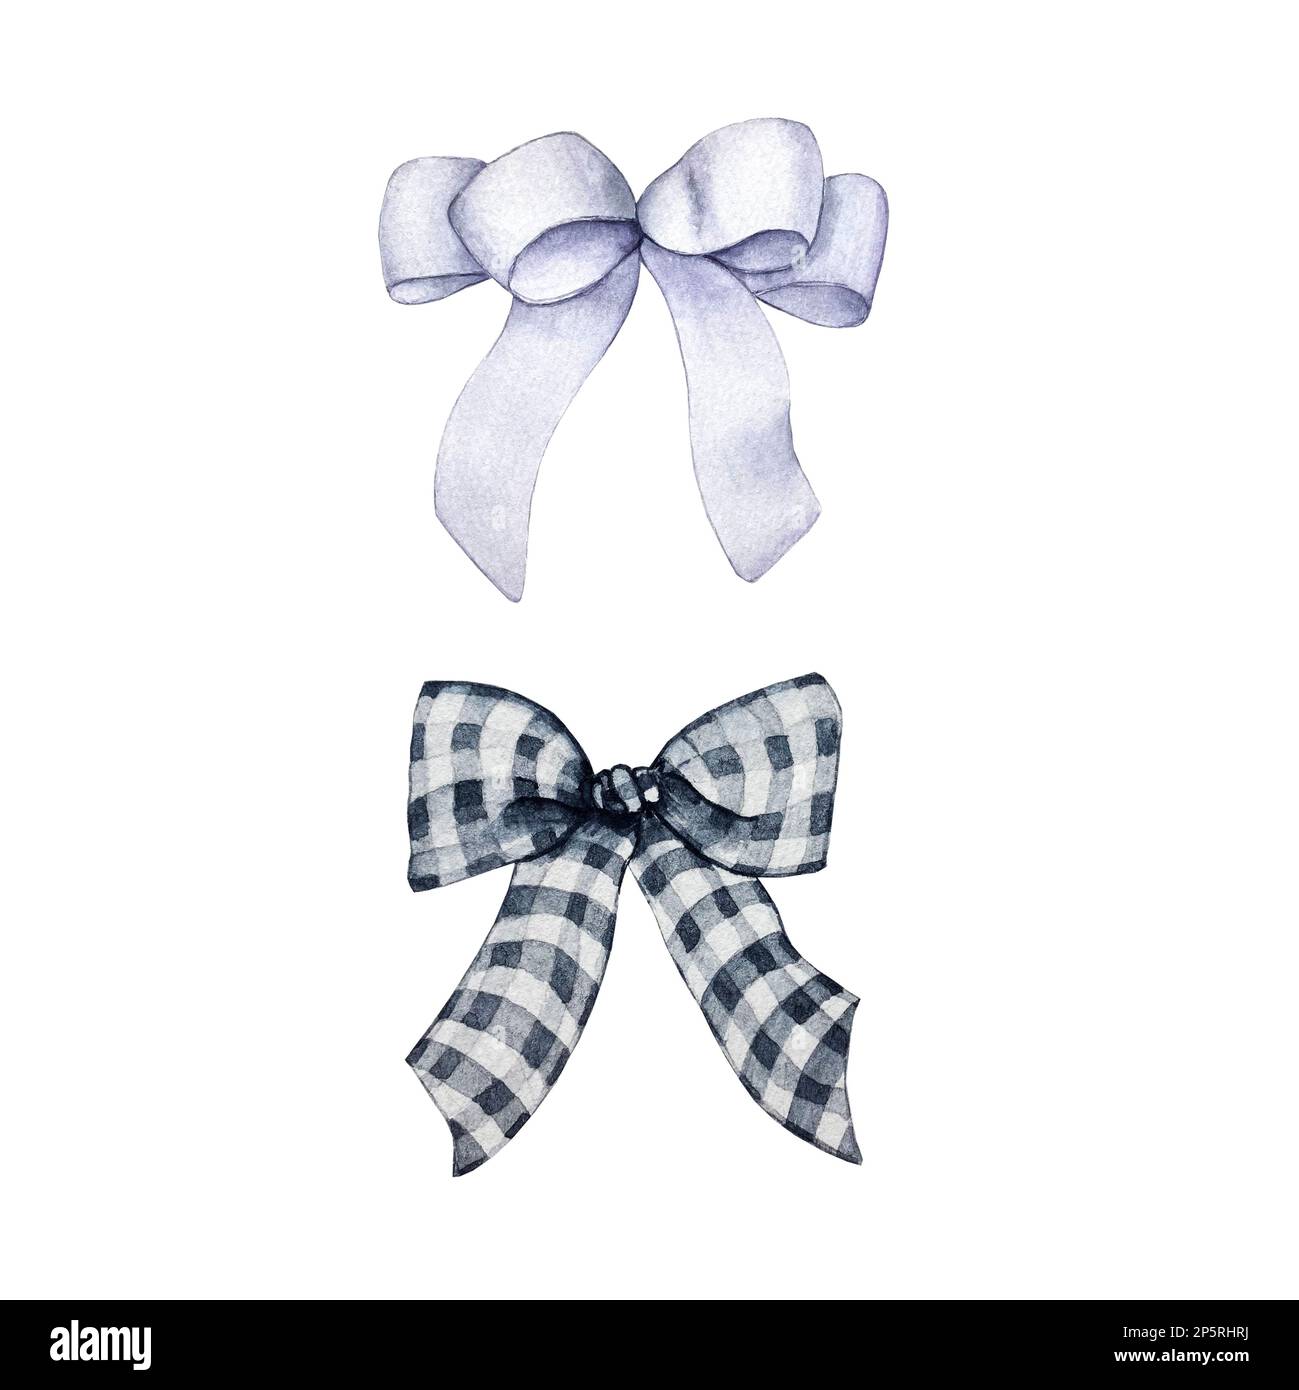 Red And White Checkered Gingham Ribbon Bow Watercolour